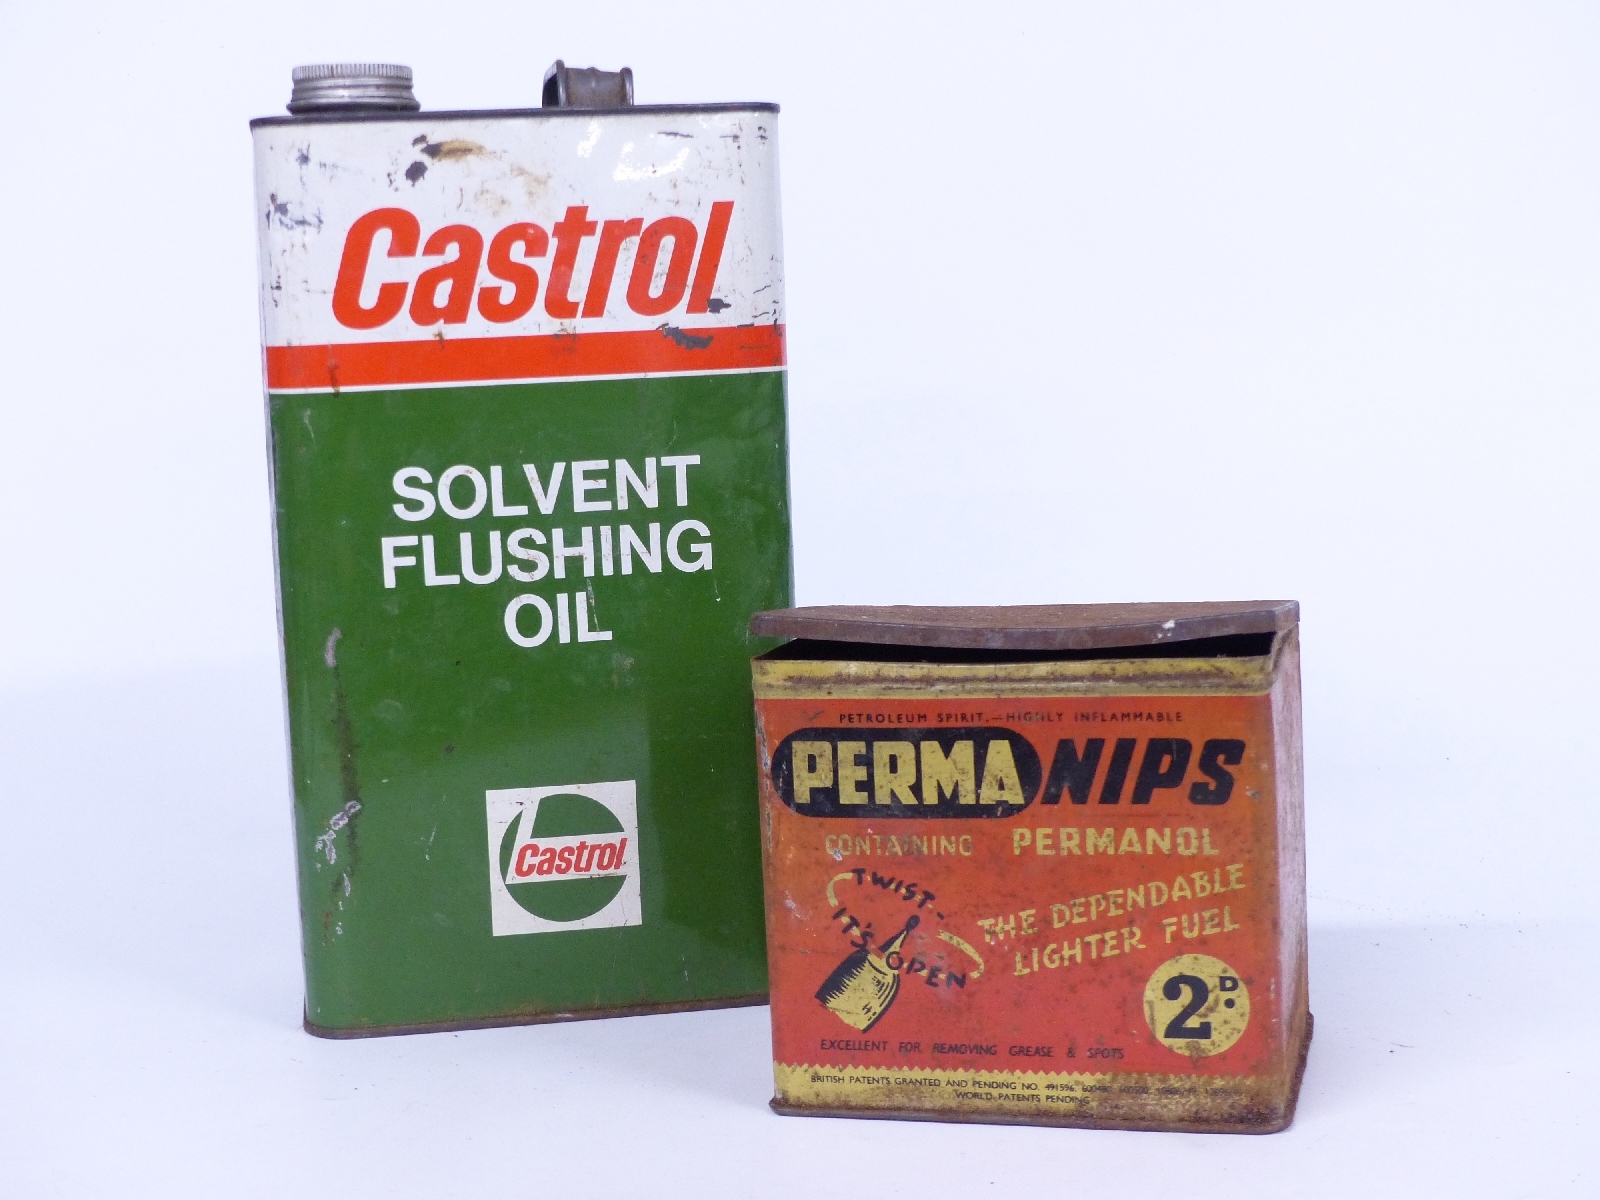 Castrol solvent flushing oil vintage 1 gallon can and a Permanips lighter fuel tin